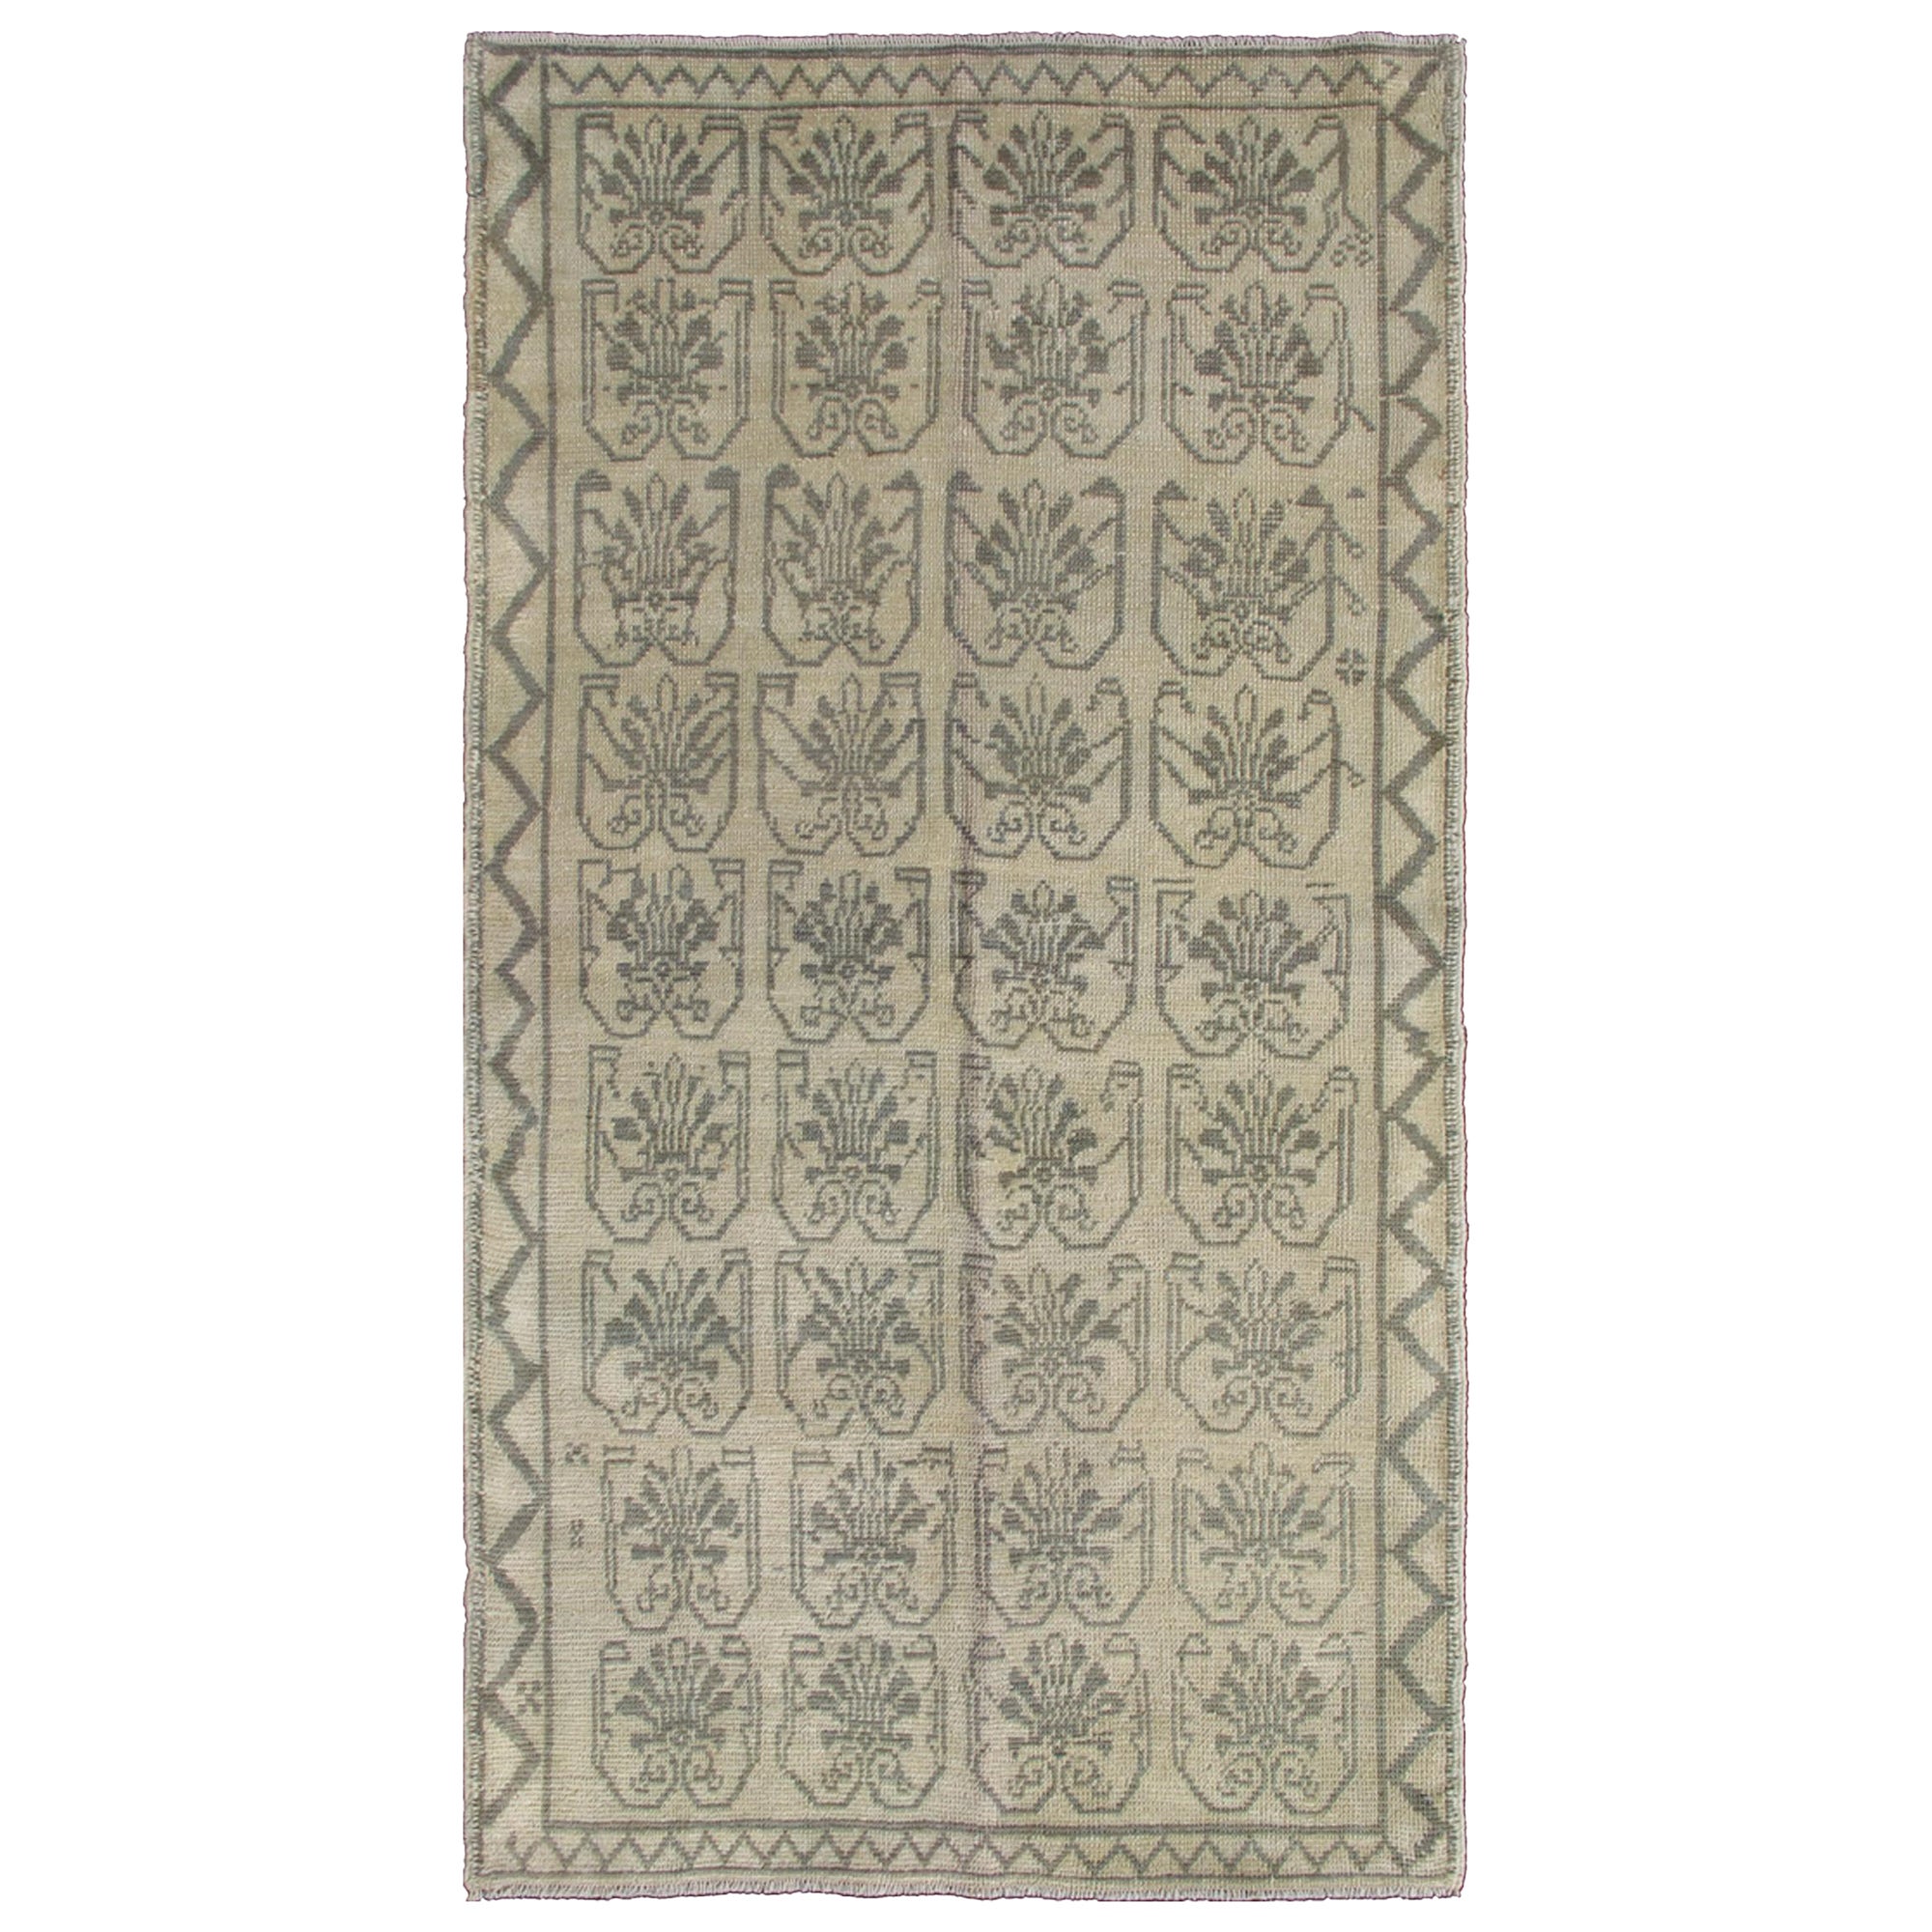 Light Taupe, Gray-Green, and Cream Turkish Tulu Vintage Rug with Latticework For Sale